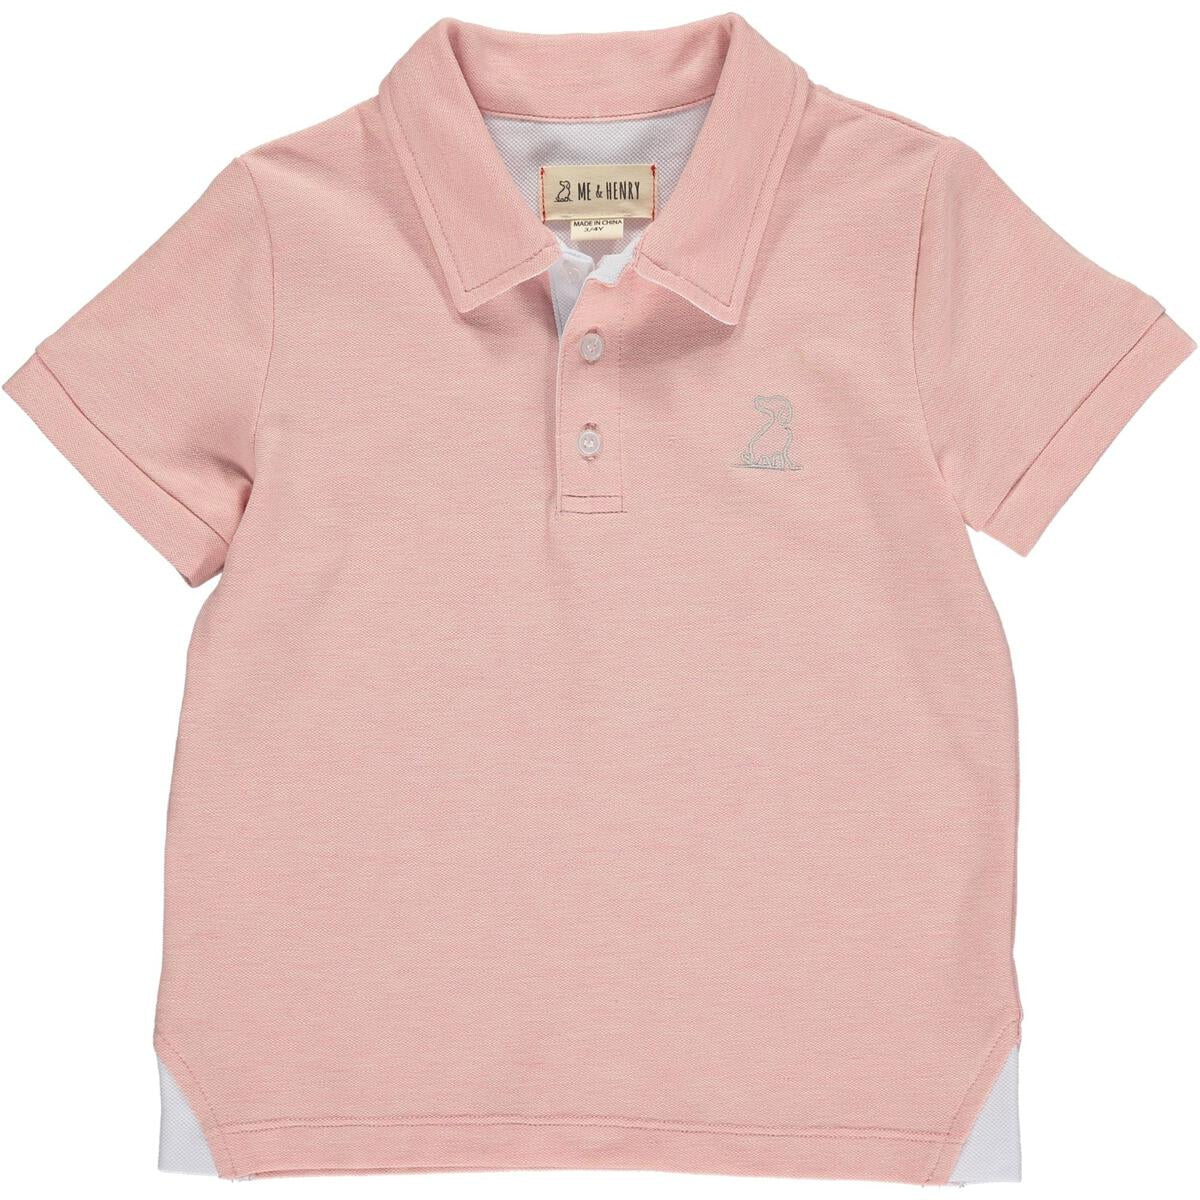 STARBOARD PIQUE POLO - PINK